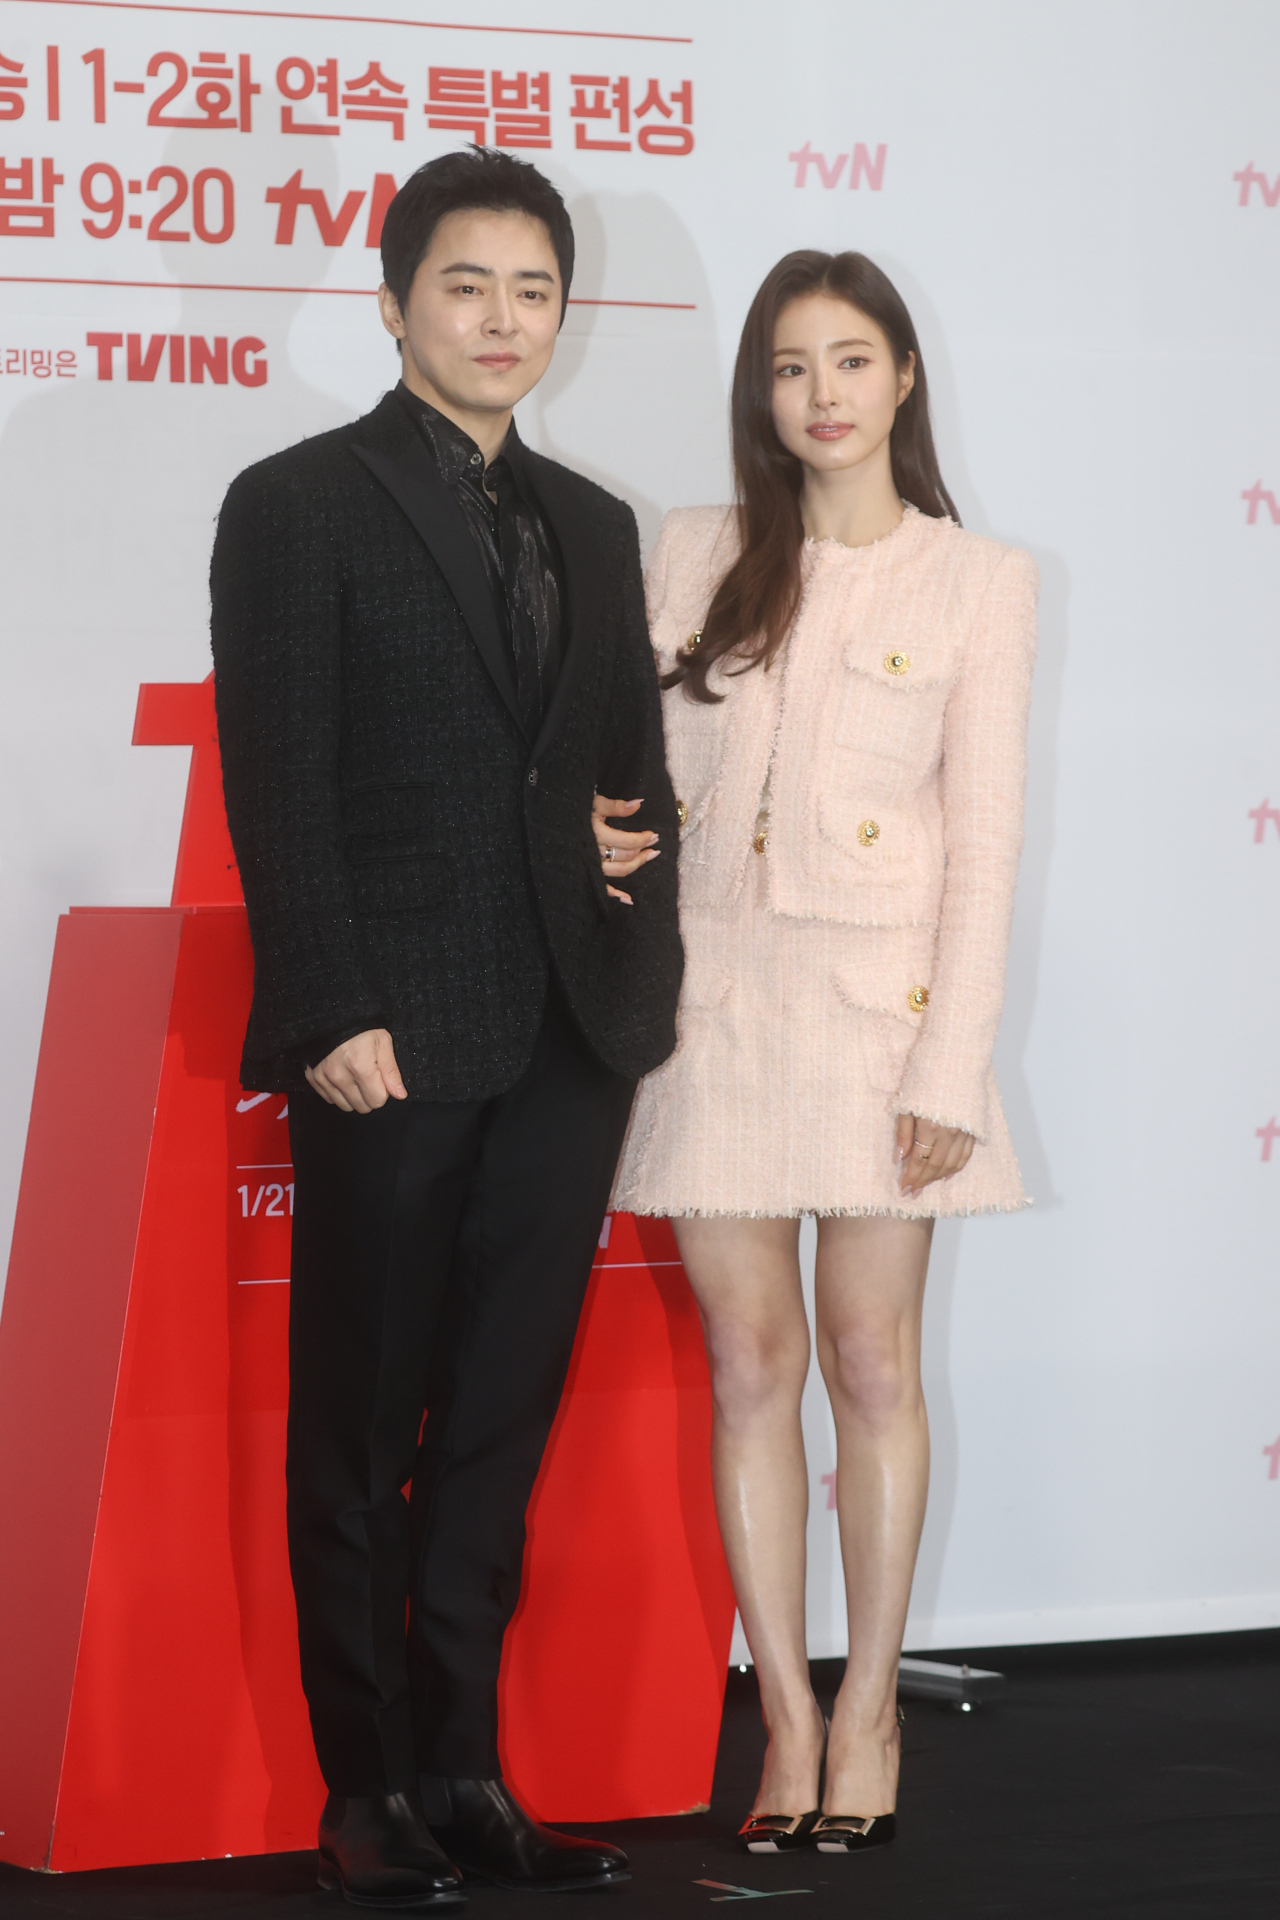 Actors Jo Jung-suk (left) and Shin Se-kyung pose for a photo during a press conference held in Seoul, Tuesday. (Yonhap)